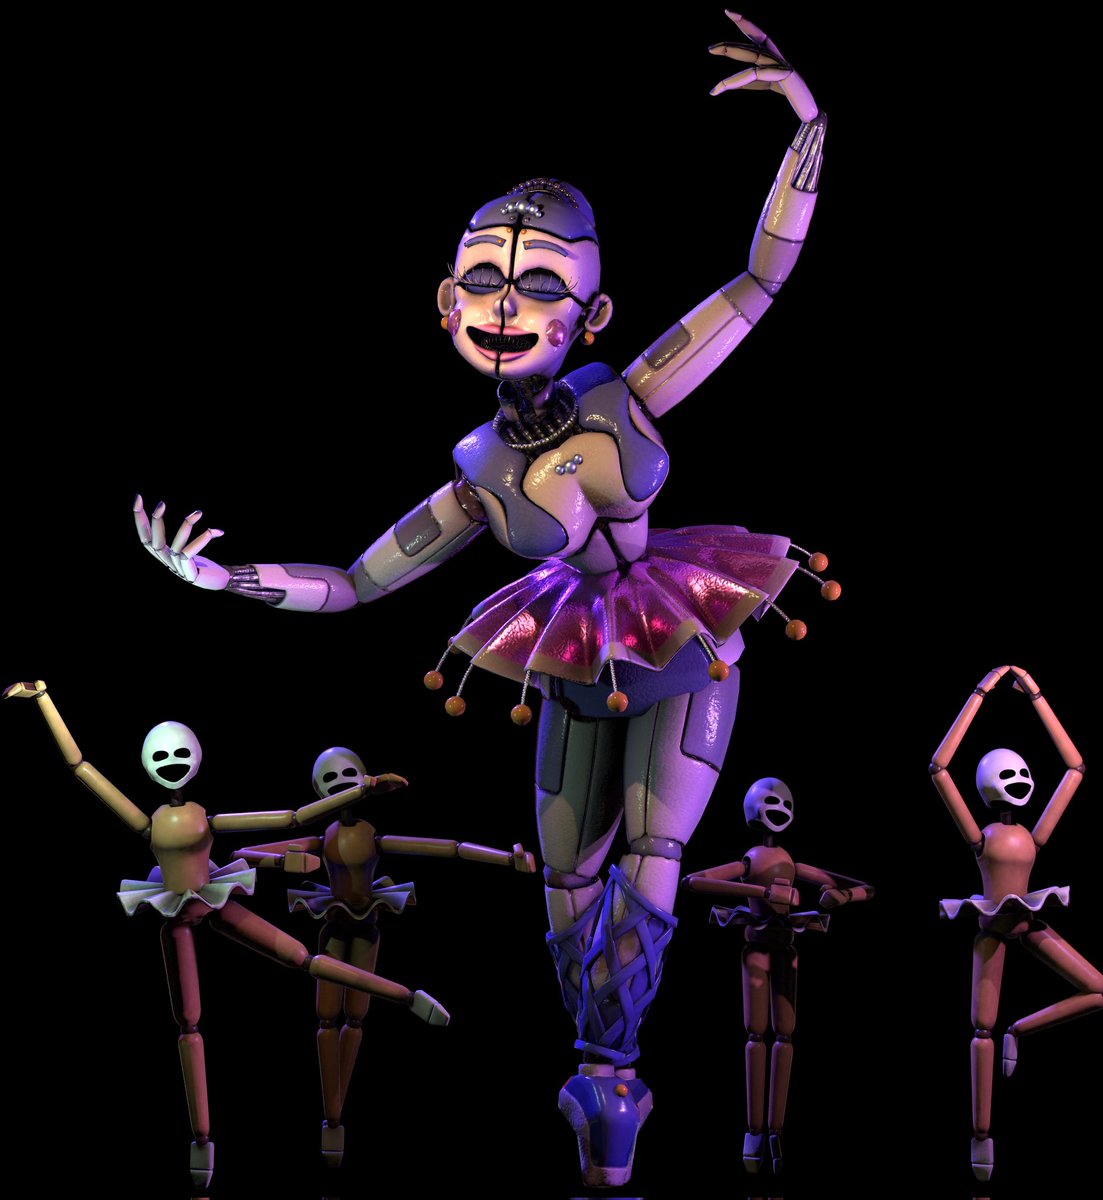 @theworld_ender But will she out do ar ballora?